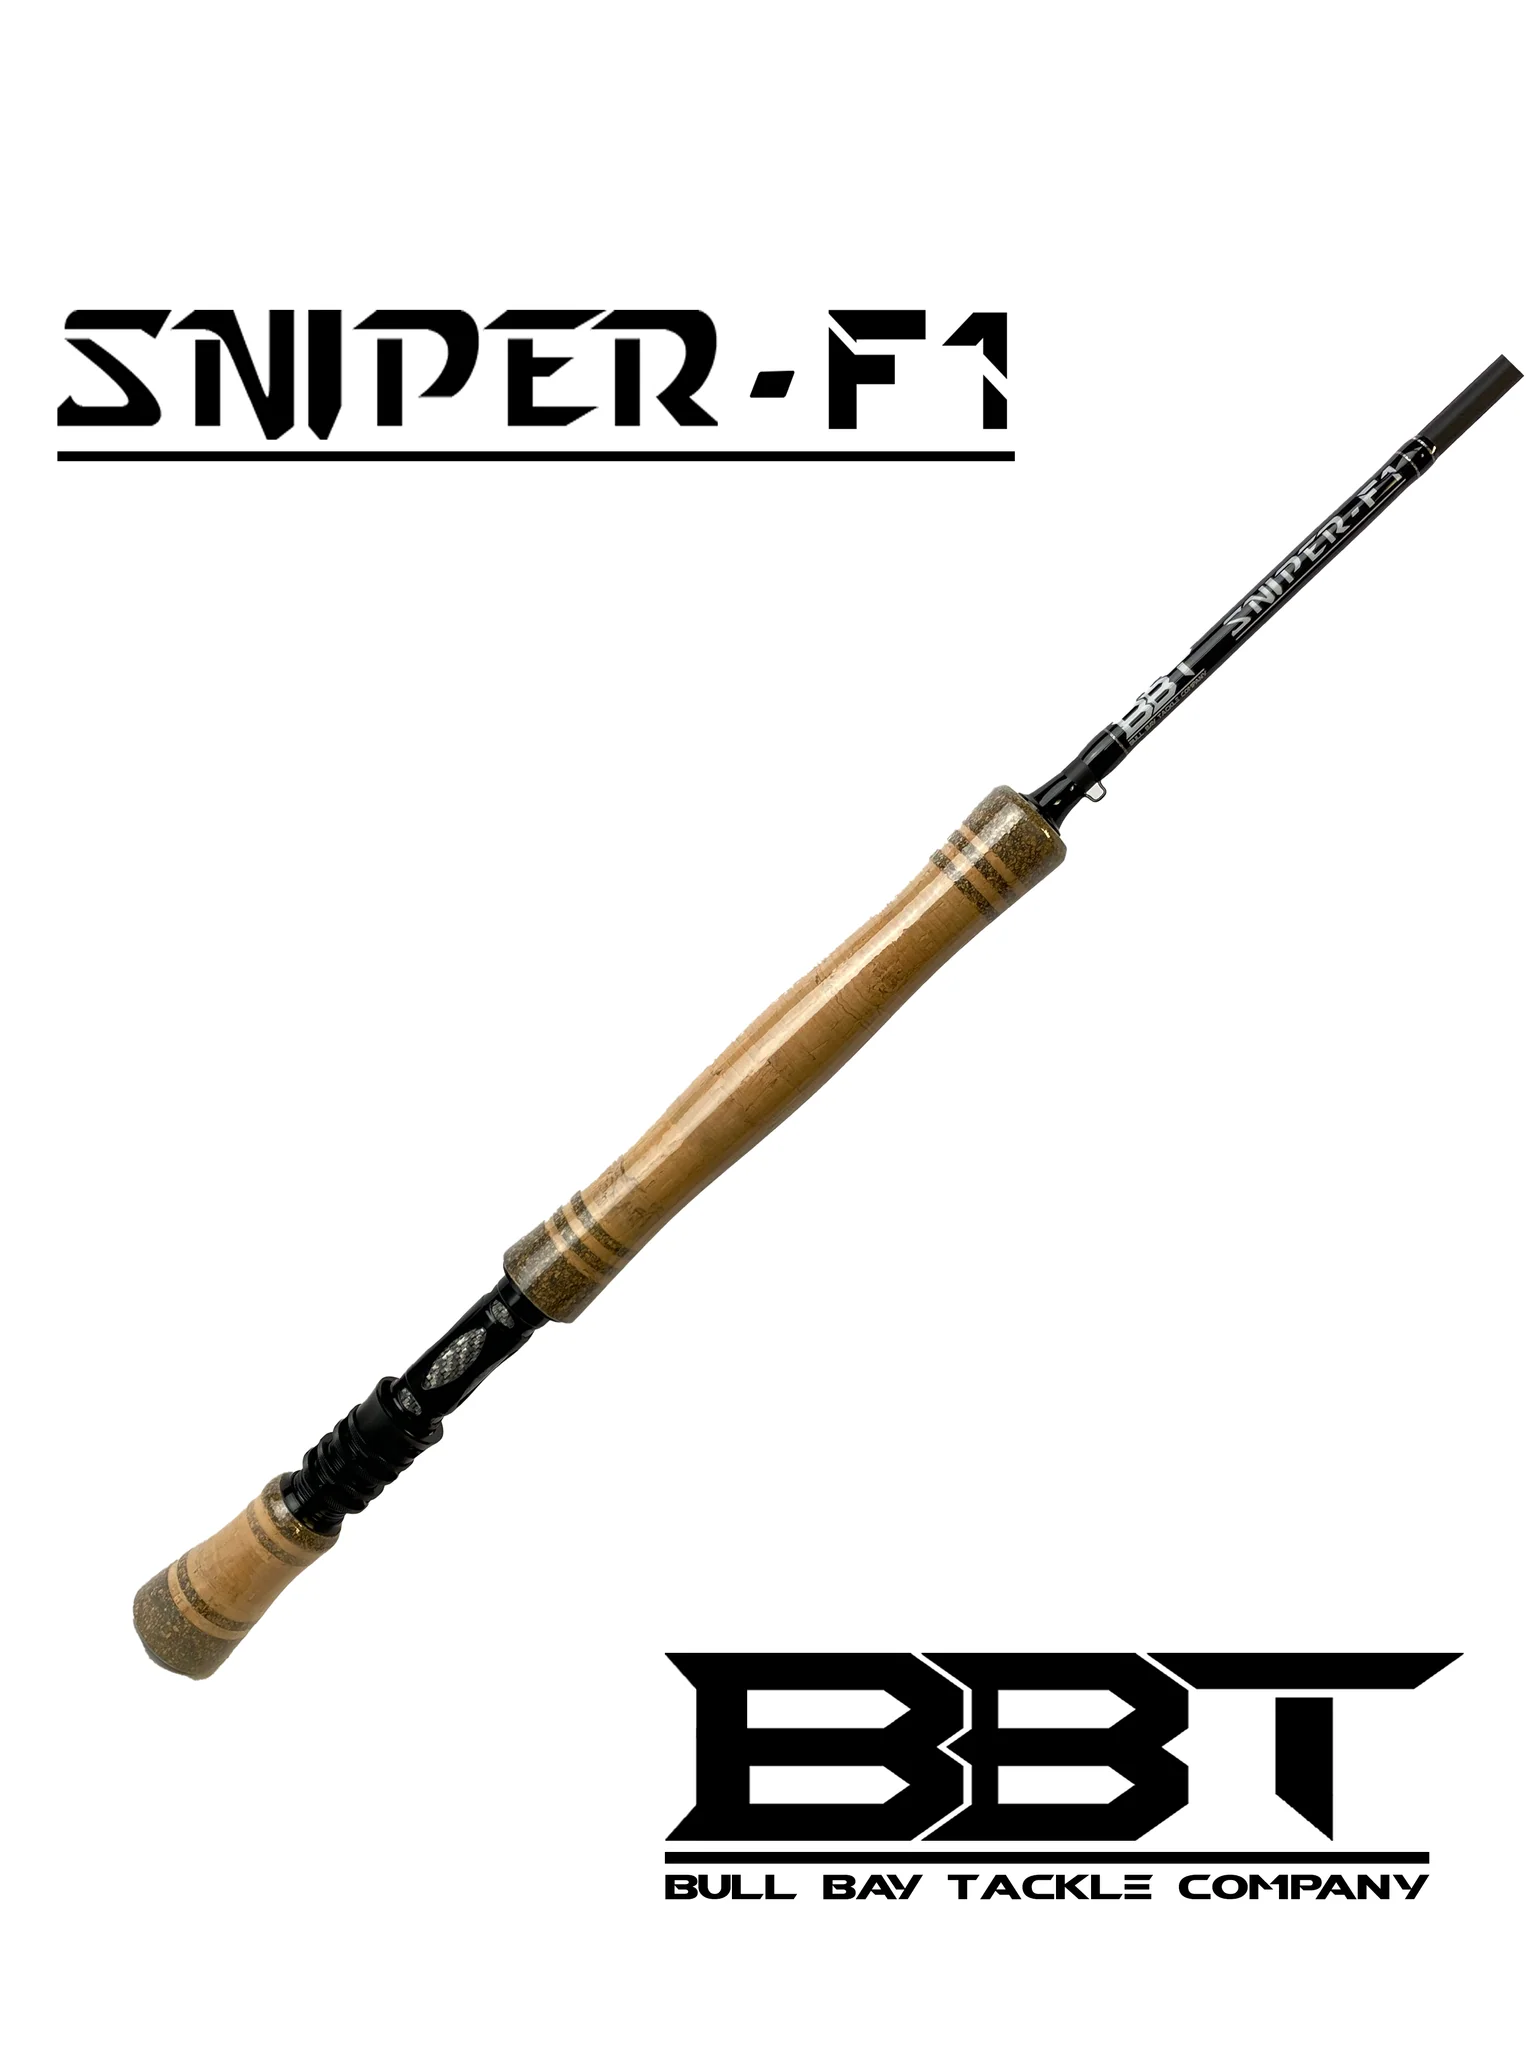 Bull Bay Tackle Sniper F-1 Fly Rod 12Wt - Andy Thornal Company